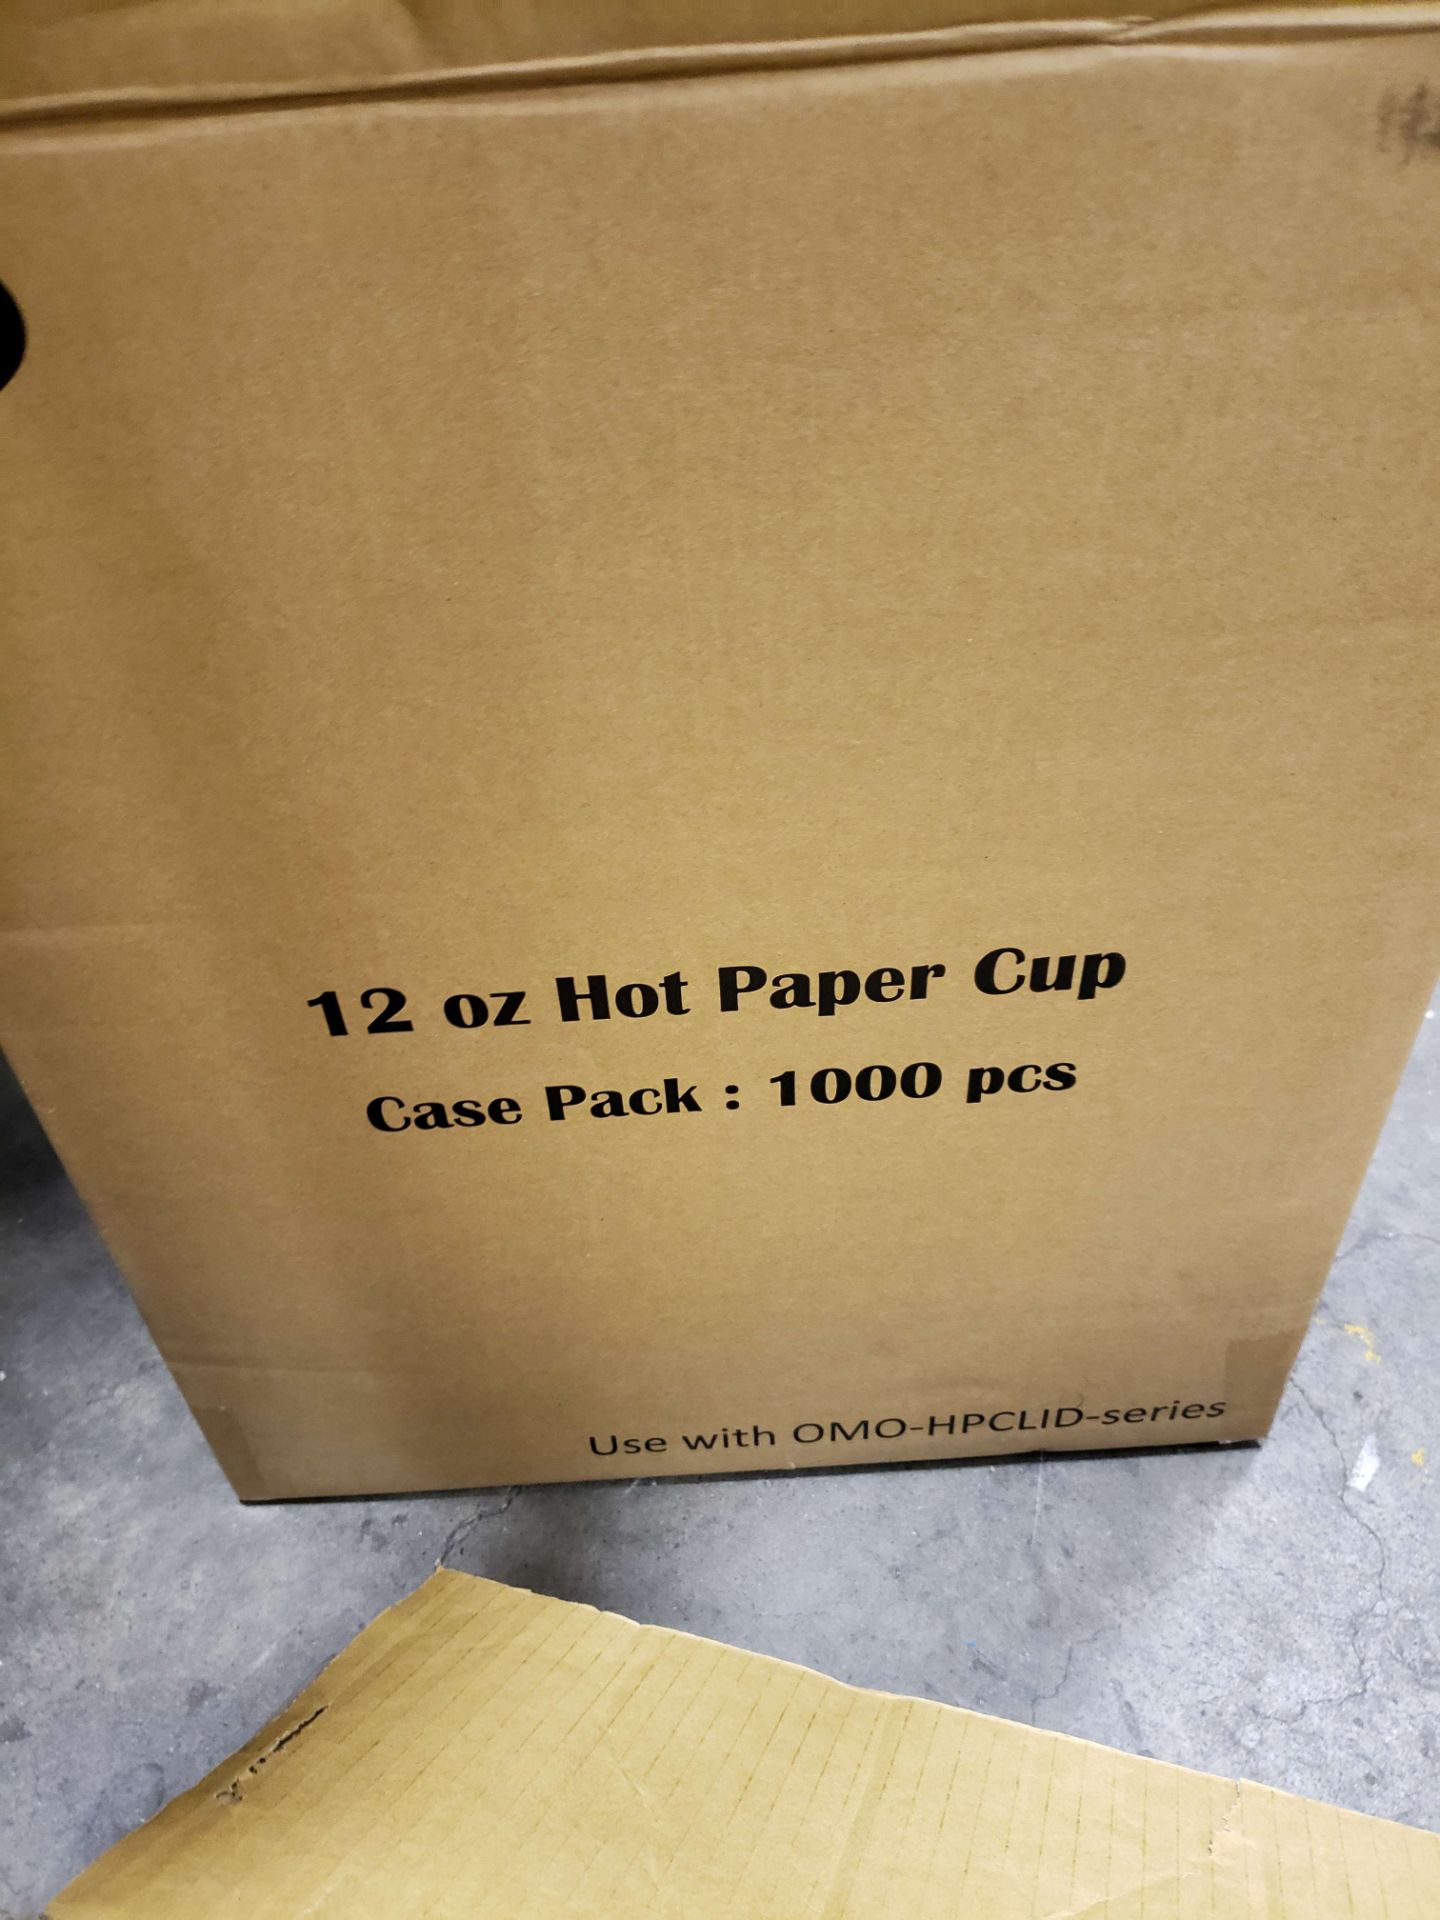 12 oz Hot Paper Cups with Lids - Partial Boxes - Image 2 of 4